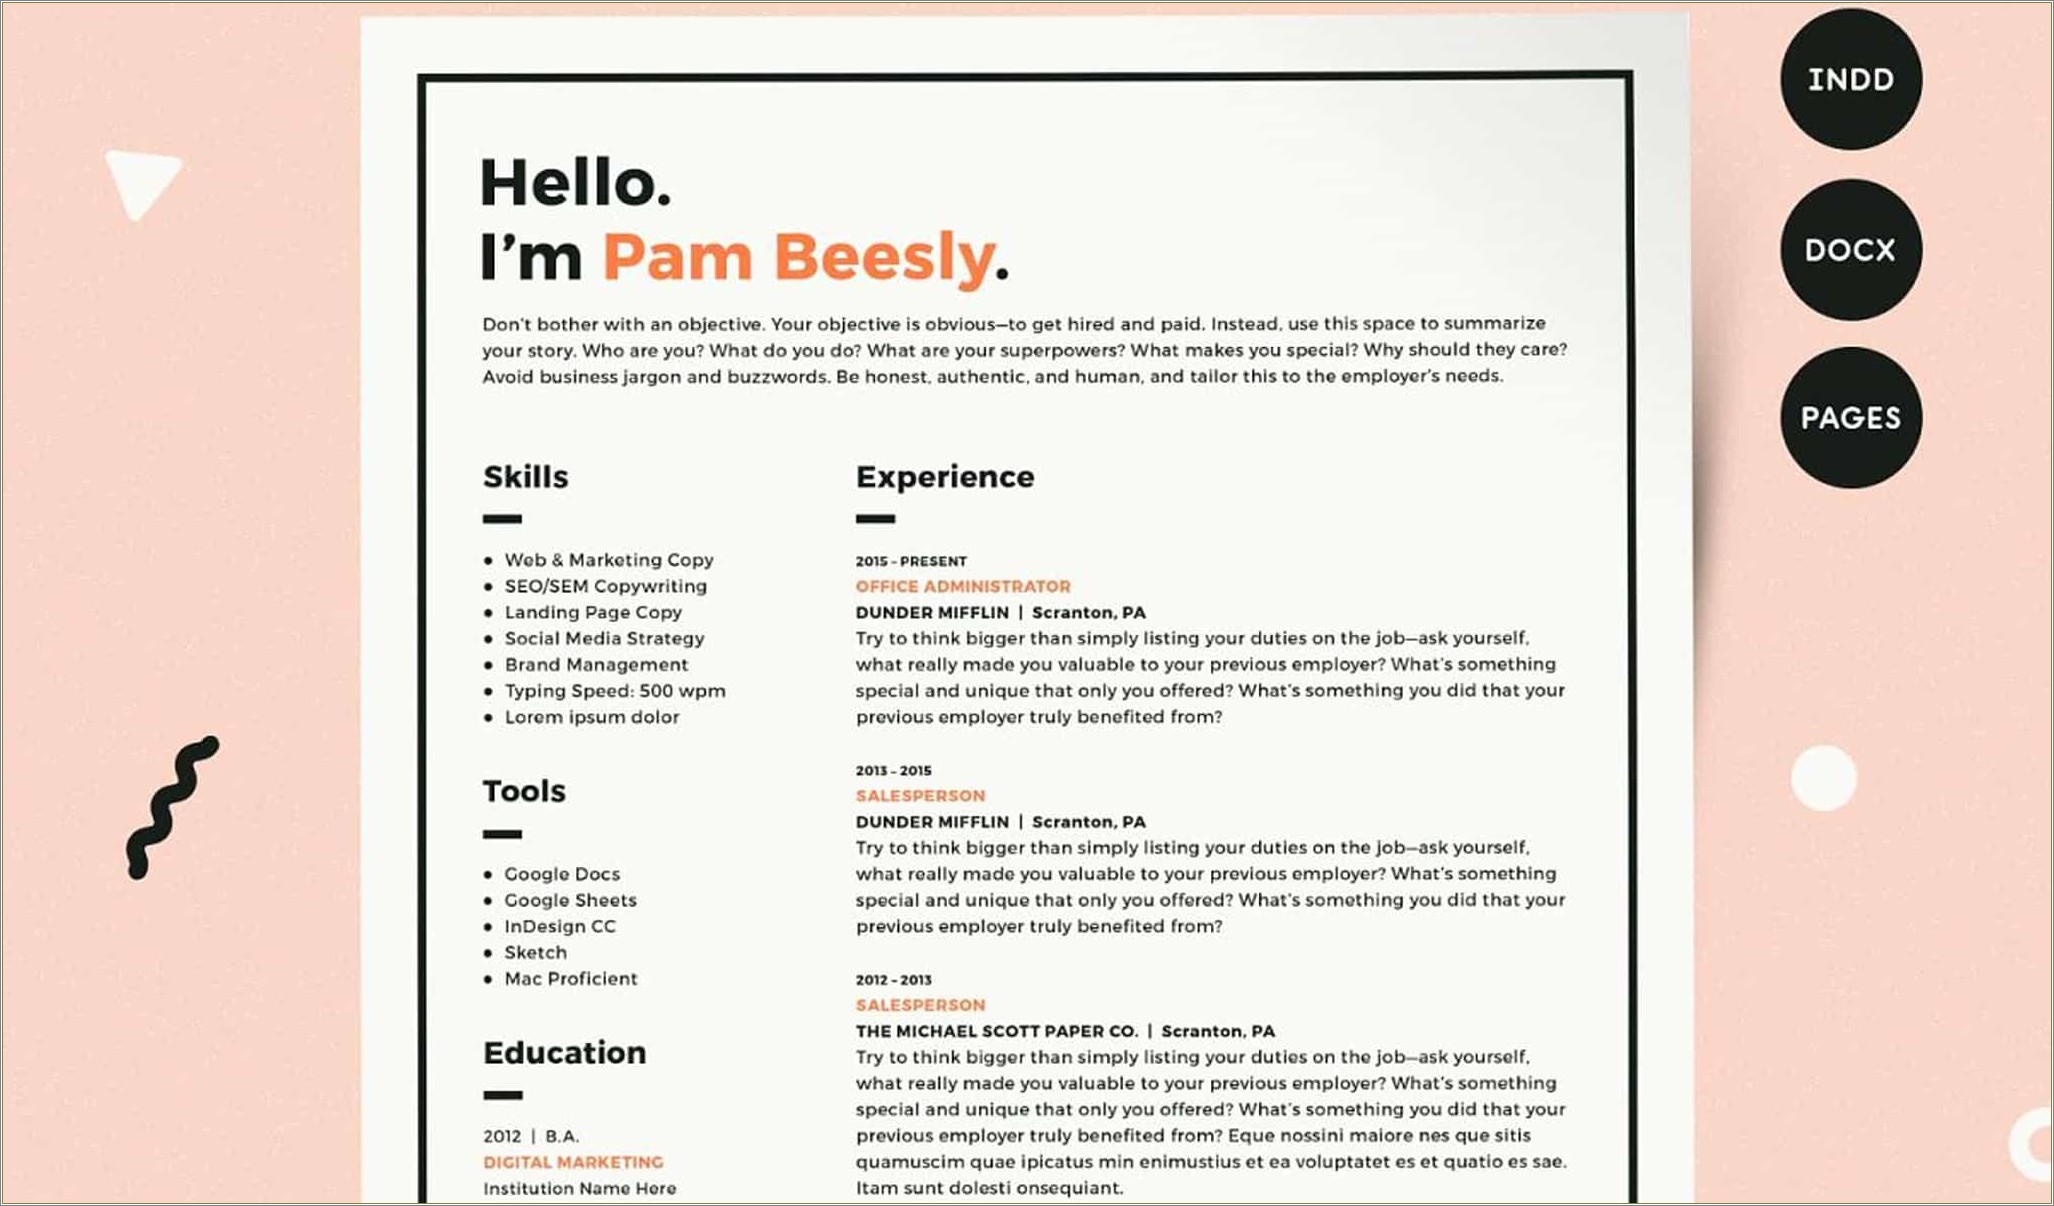 Are Fancy Resumes Really A Good Idea